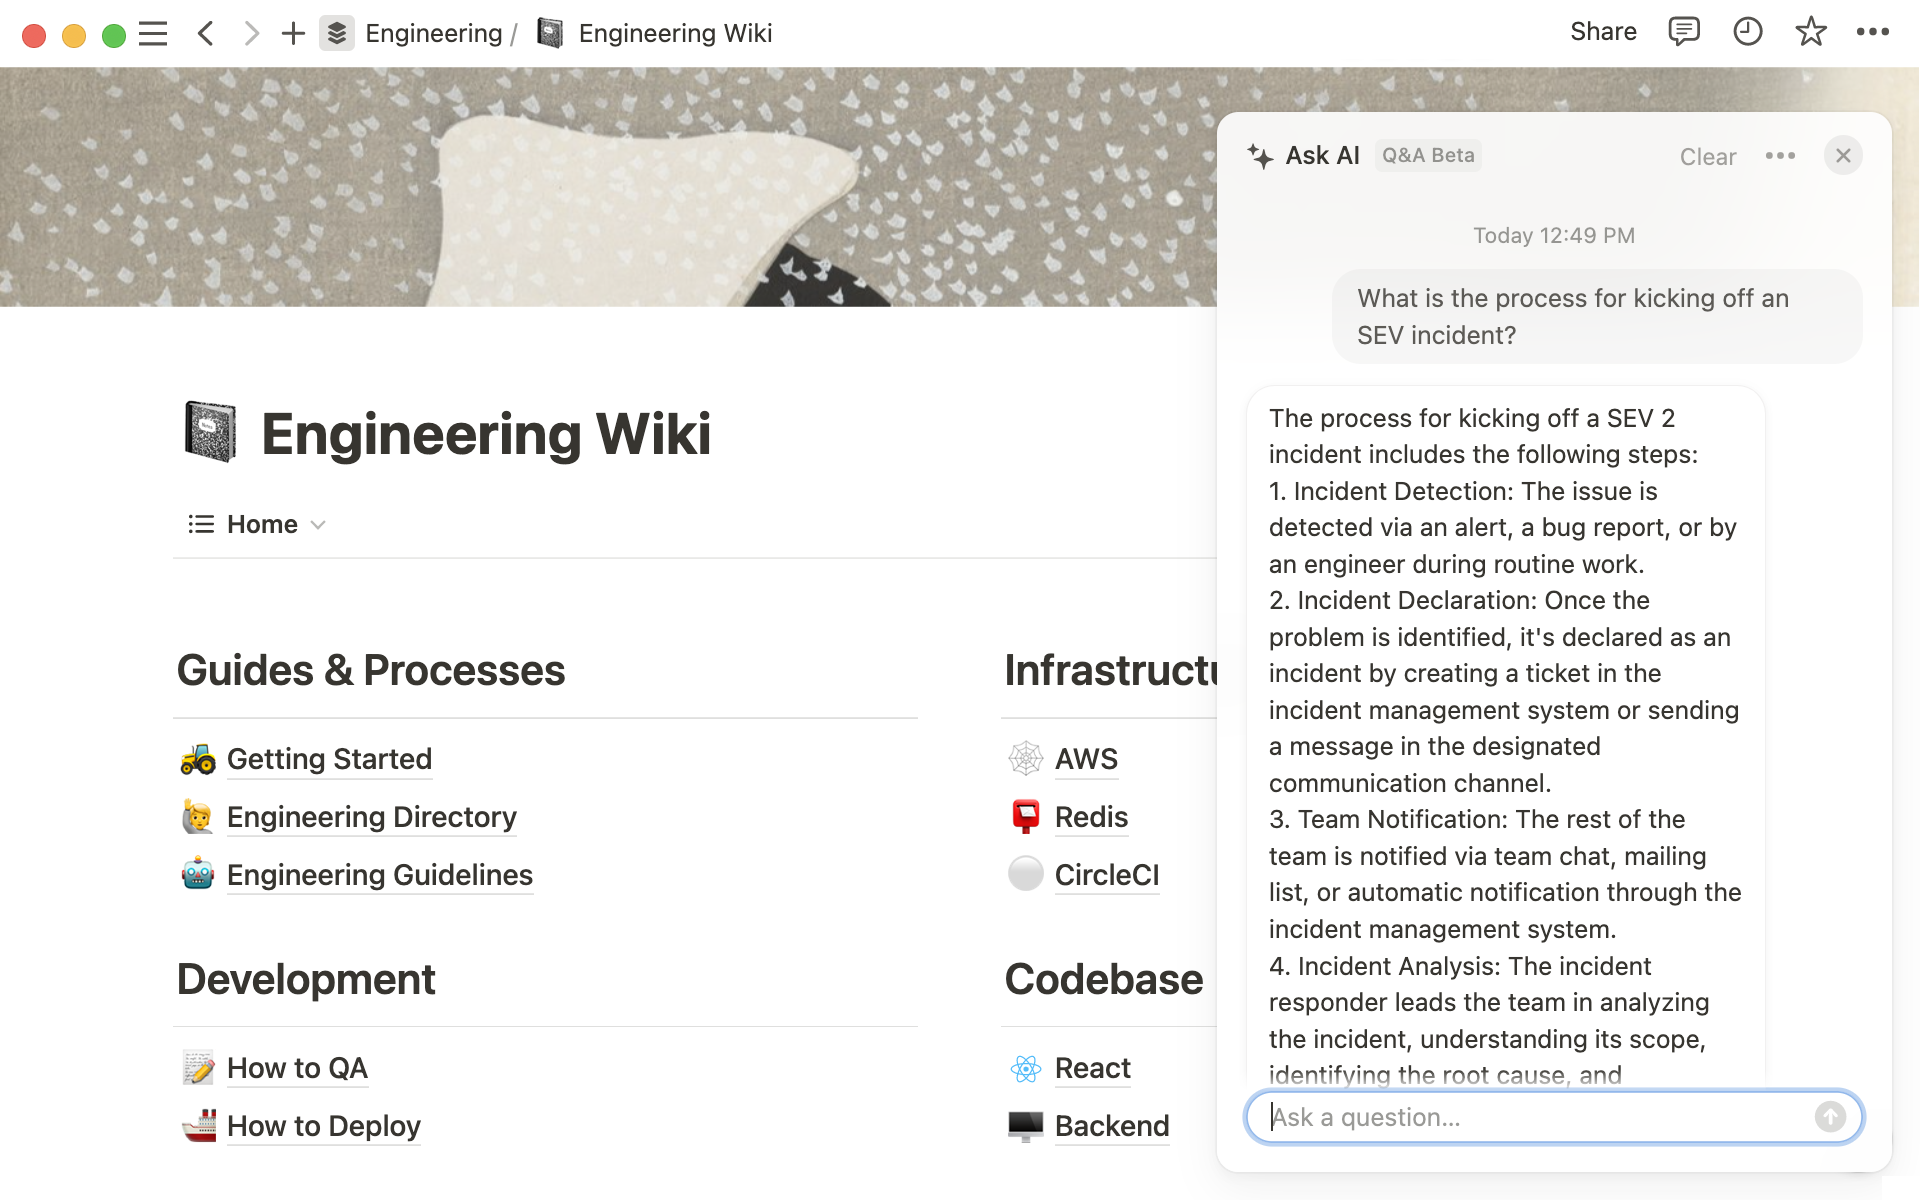 When your engineering wiki lives in Notion, you can use Q&A to unblock yourself and get on with work faster. 